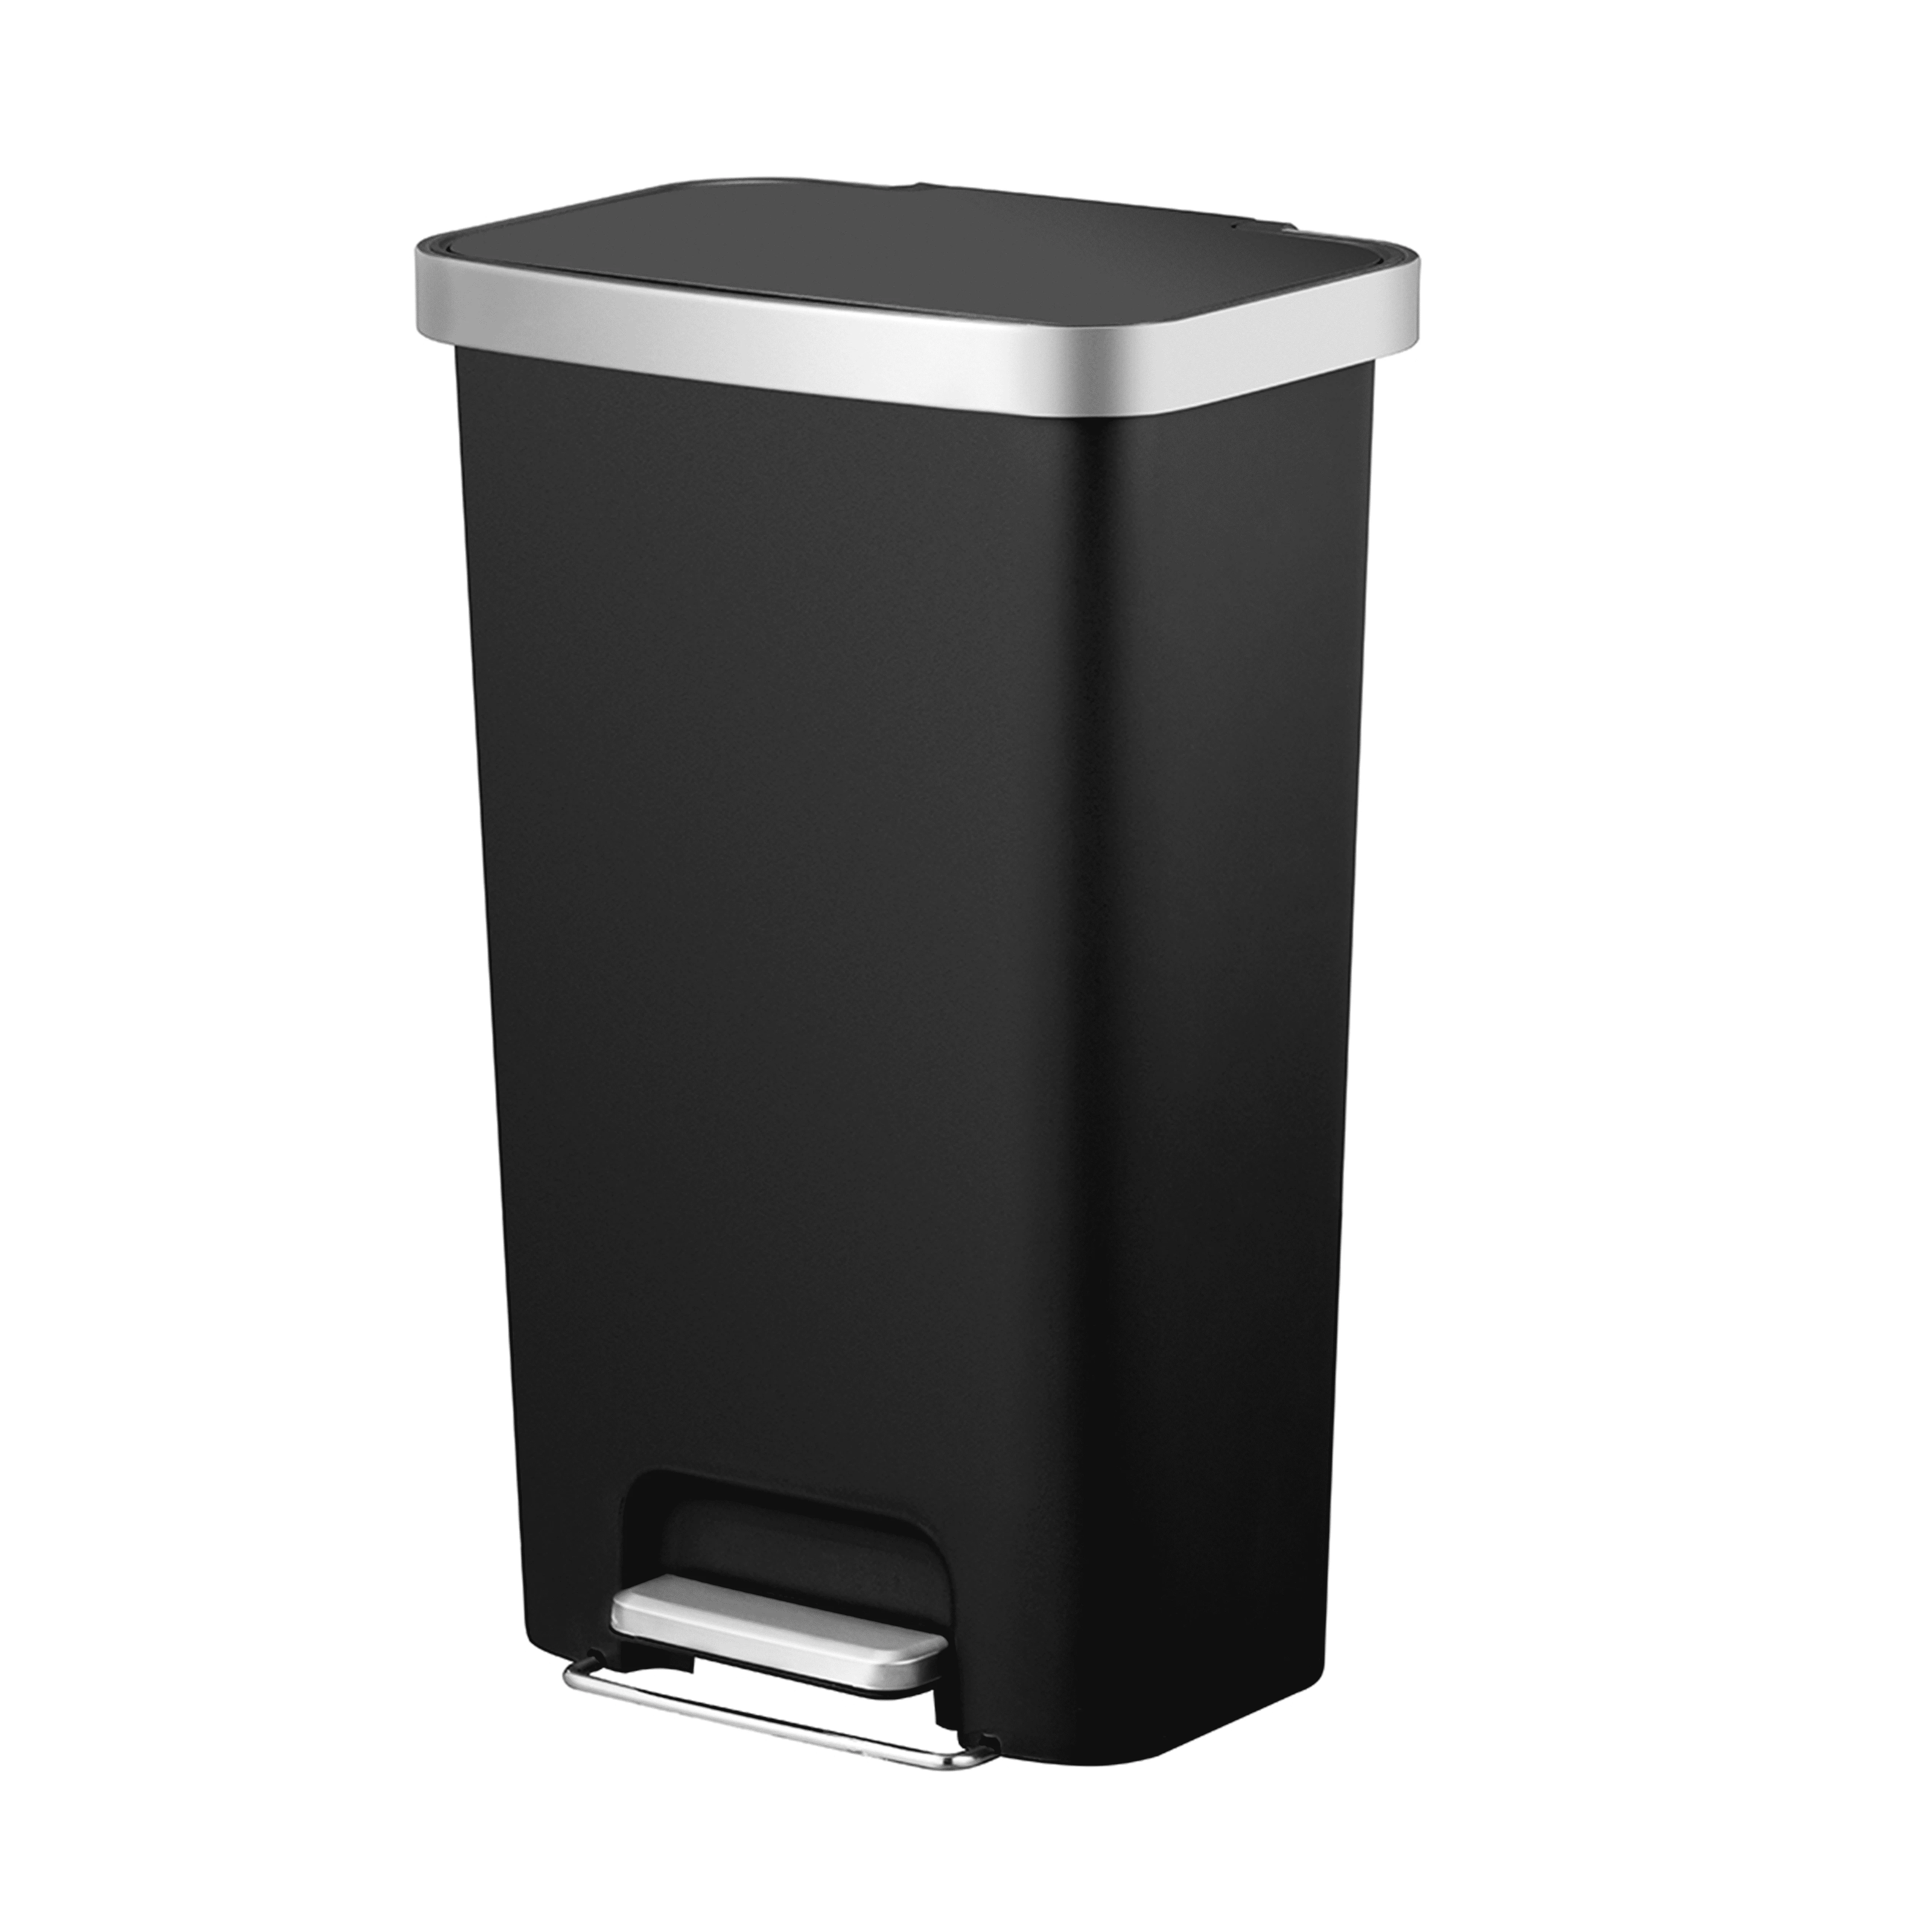 

Better Homes & Gardens 11.9-Gallon Plastic Garbage Can, Black